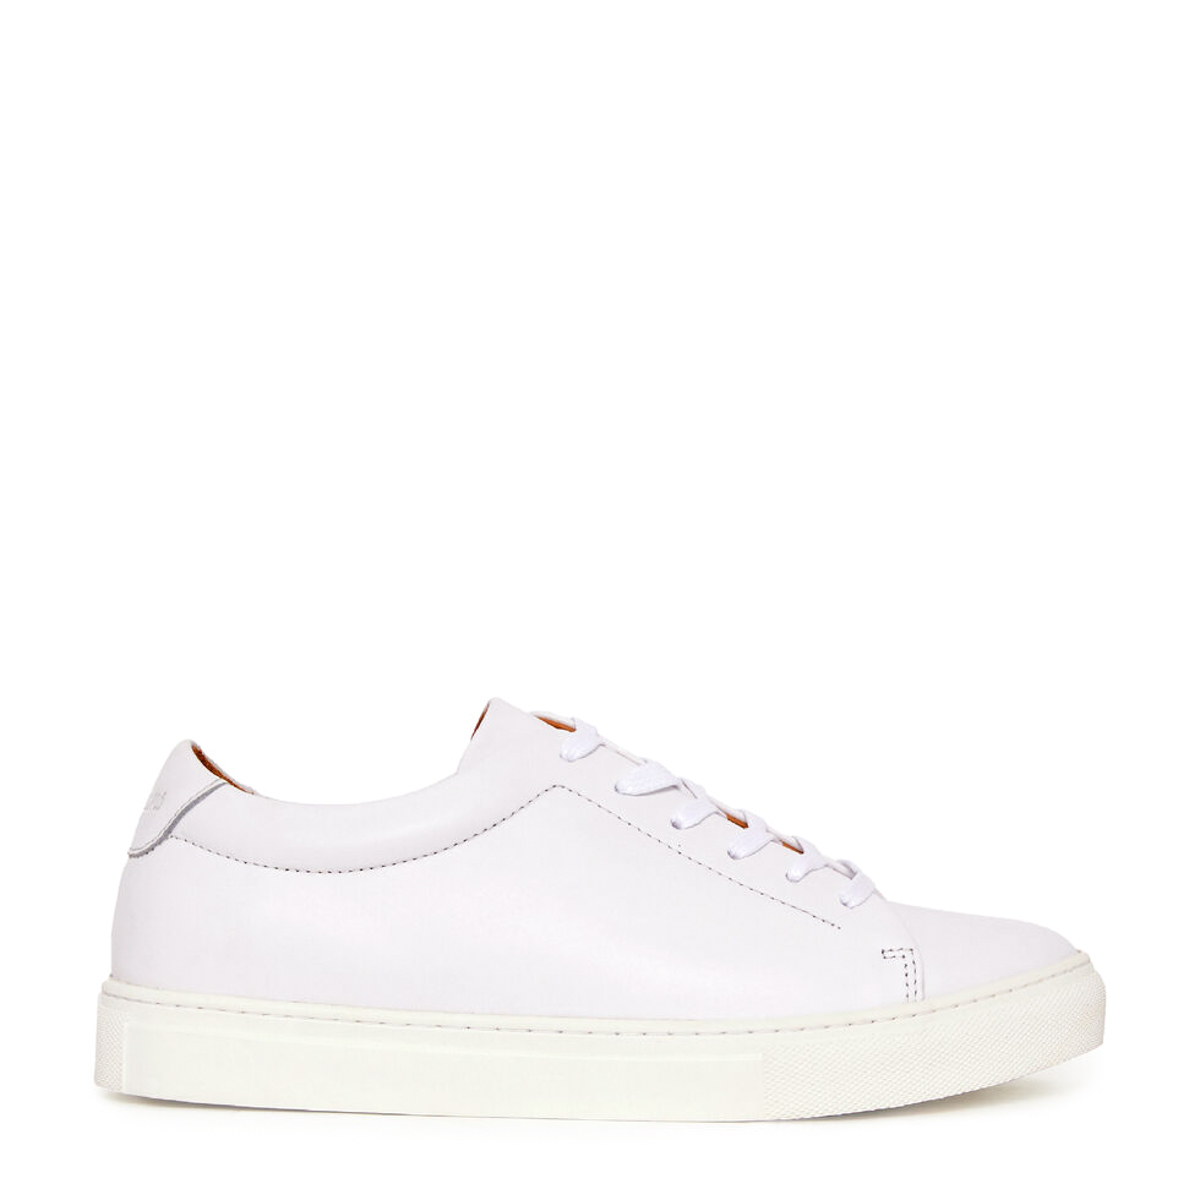 R M Williams Surry White - Issimo Shoes